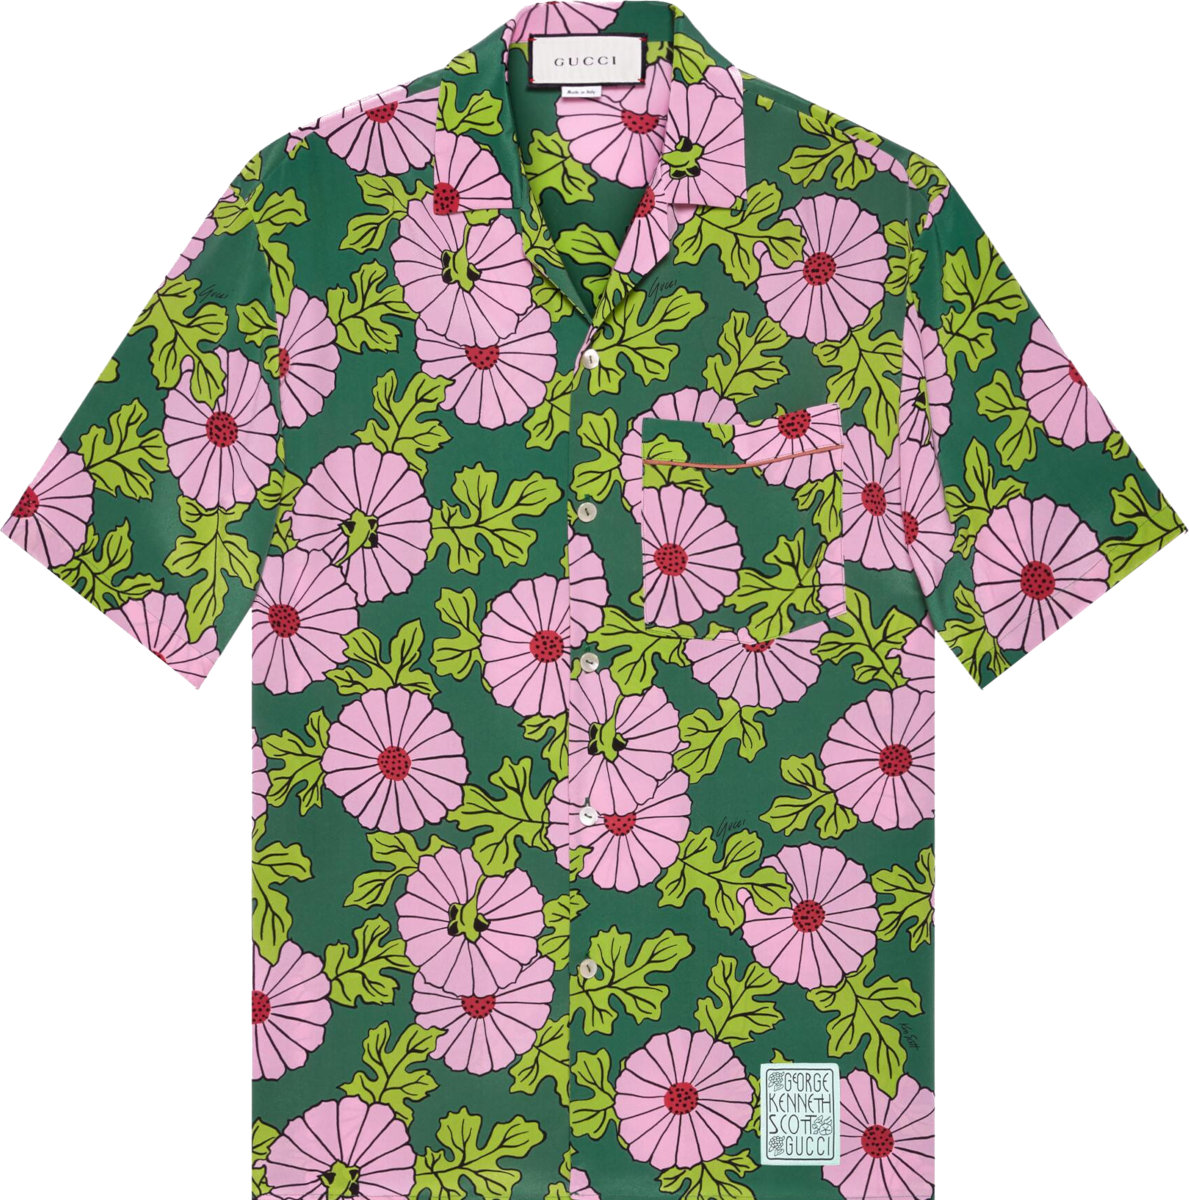 Gucci x Ken Scott Green & Pink-Floral Shirt | Incorporated Style